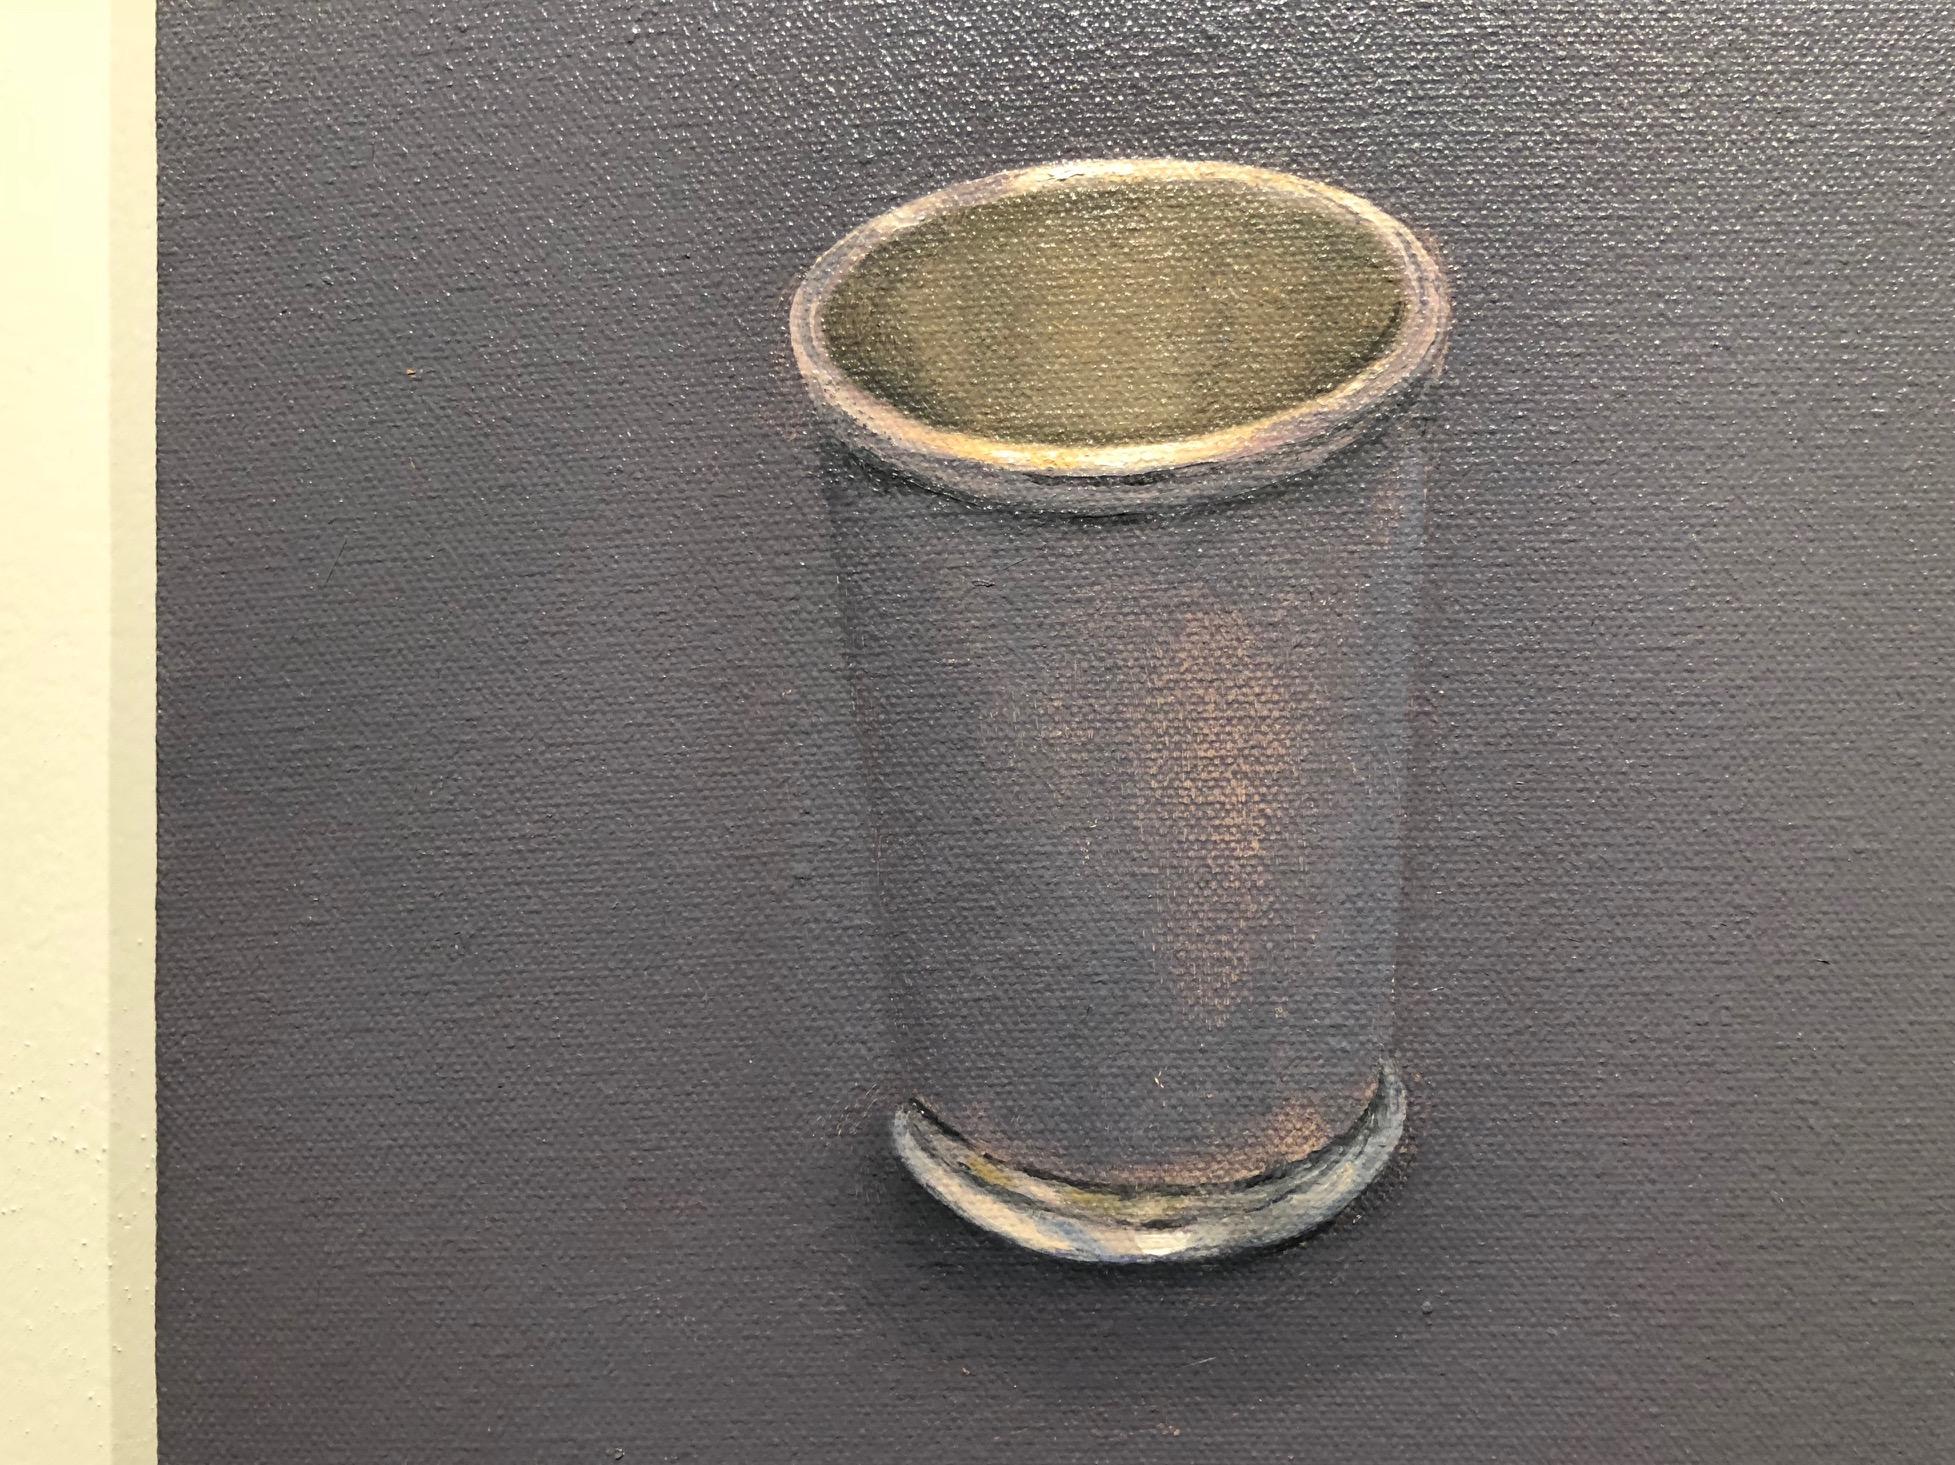 Still Life with Silver Cup / minimal, serene oil on canvas - American Realist Painting by Willard Dixon